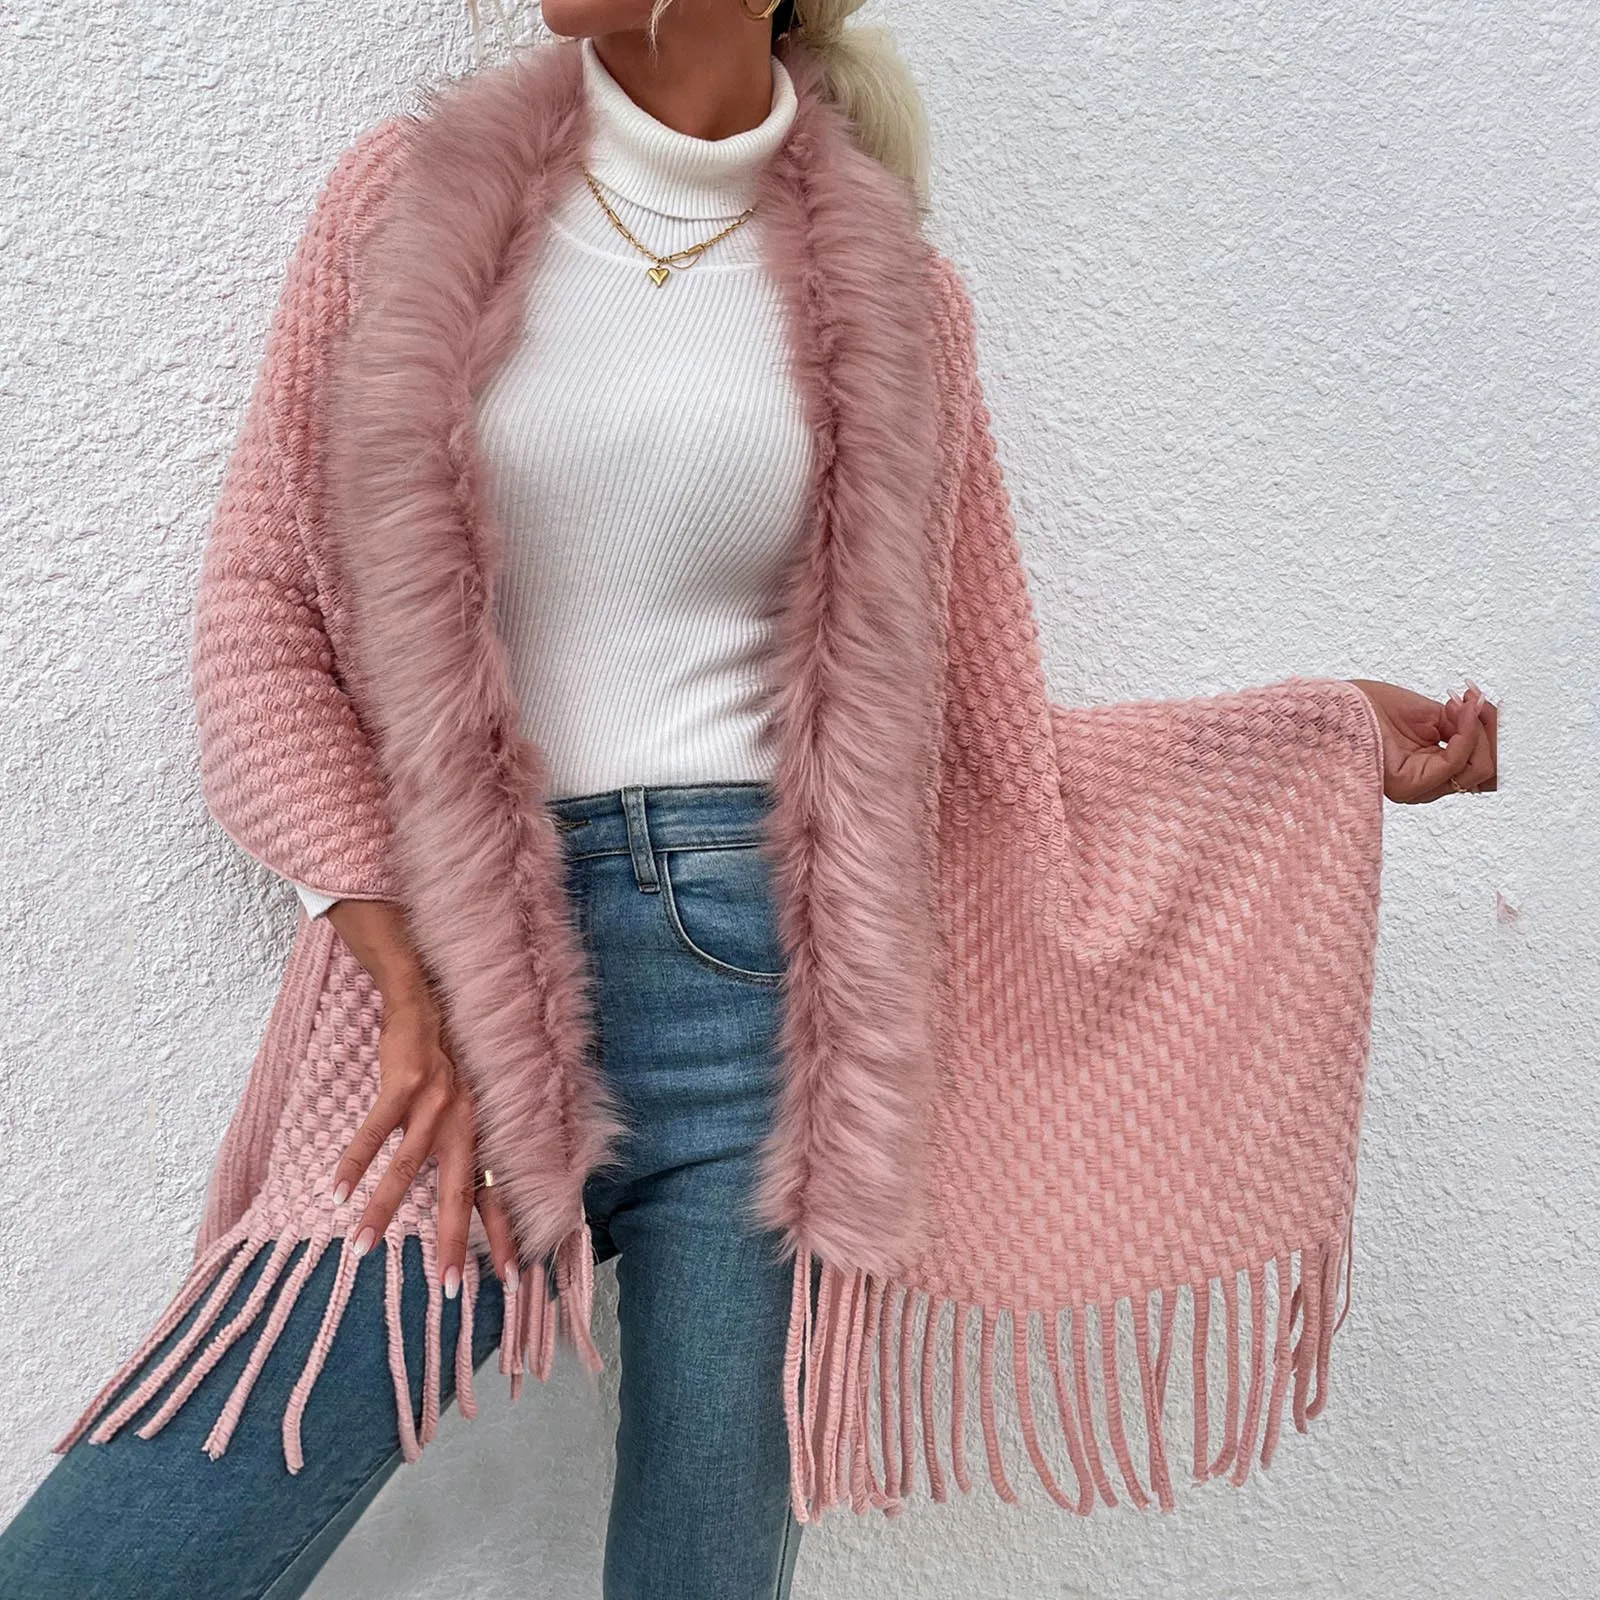 

Winter Bohemian Shawls Fur Collar Wraps Fringe Oversized Solid Color Womens Winter Ponchos Capes Batwing Sleeve Cardigan